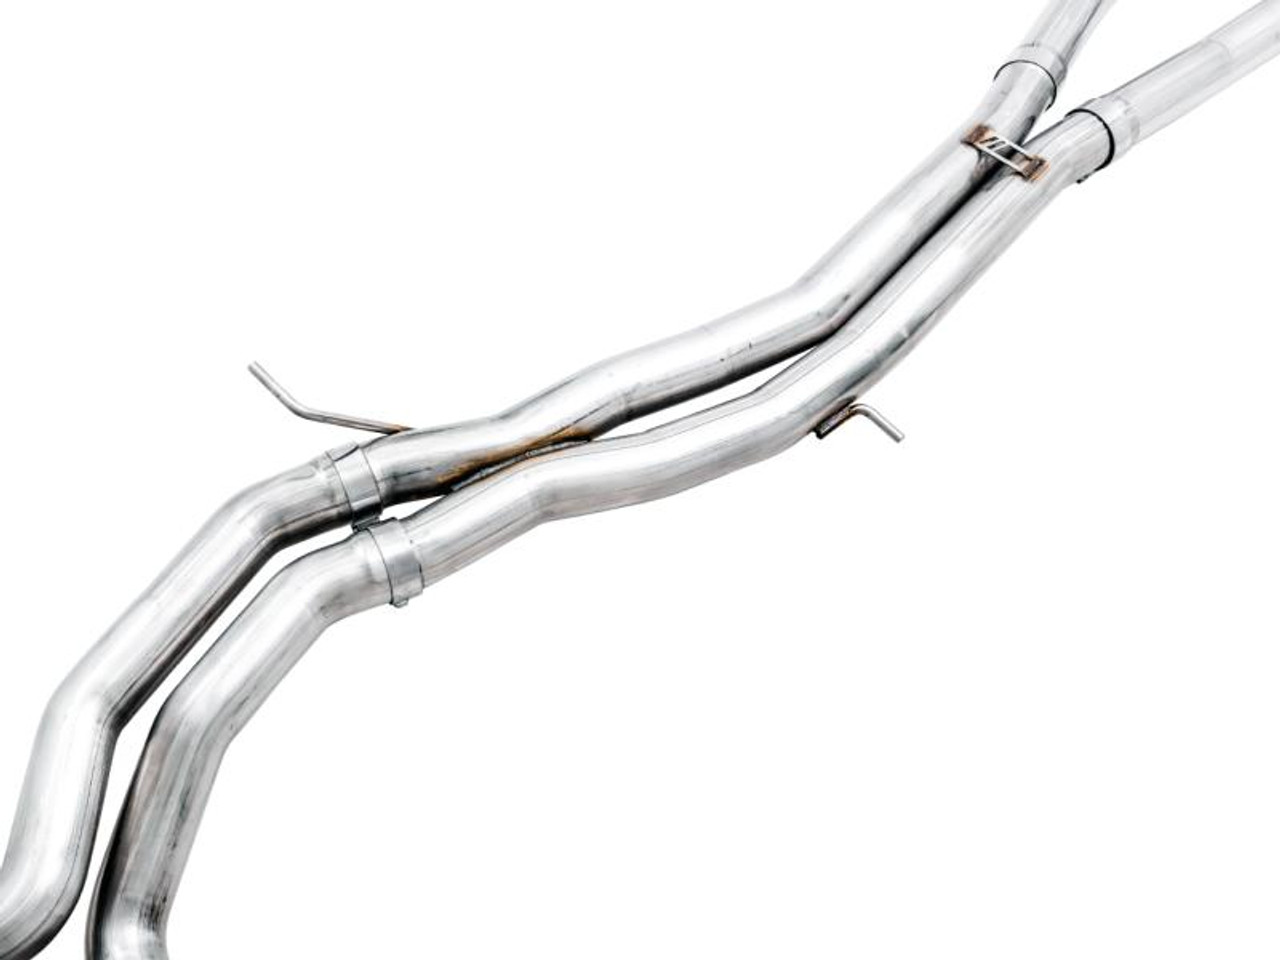 Awe Tuning AWE Tuning Audi B9 RS 5 2.9L ResFor Performance Cat Touring Edition Exhaust w/ Diamond Black Tips - 3015-33112